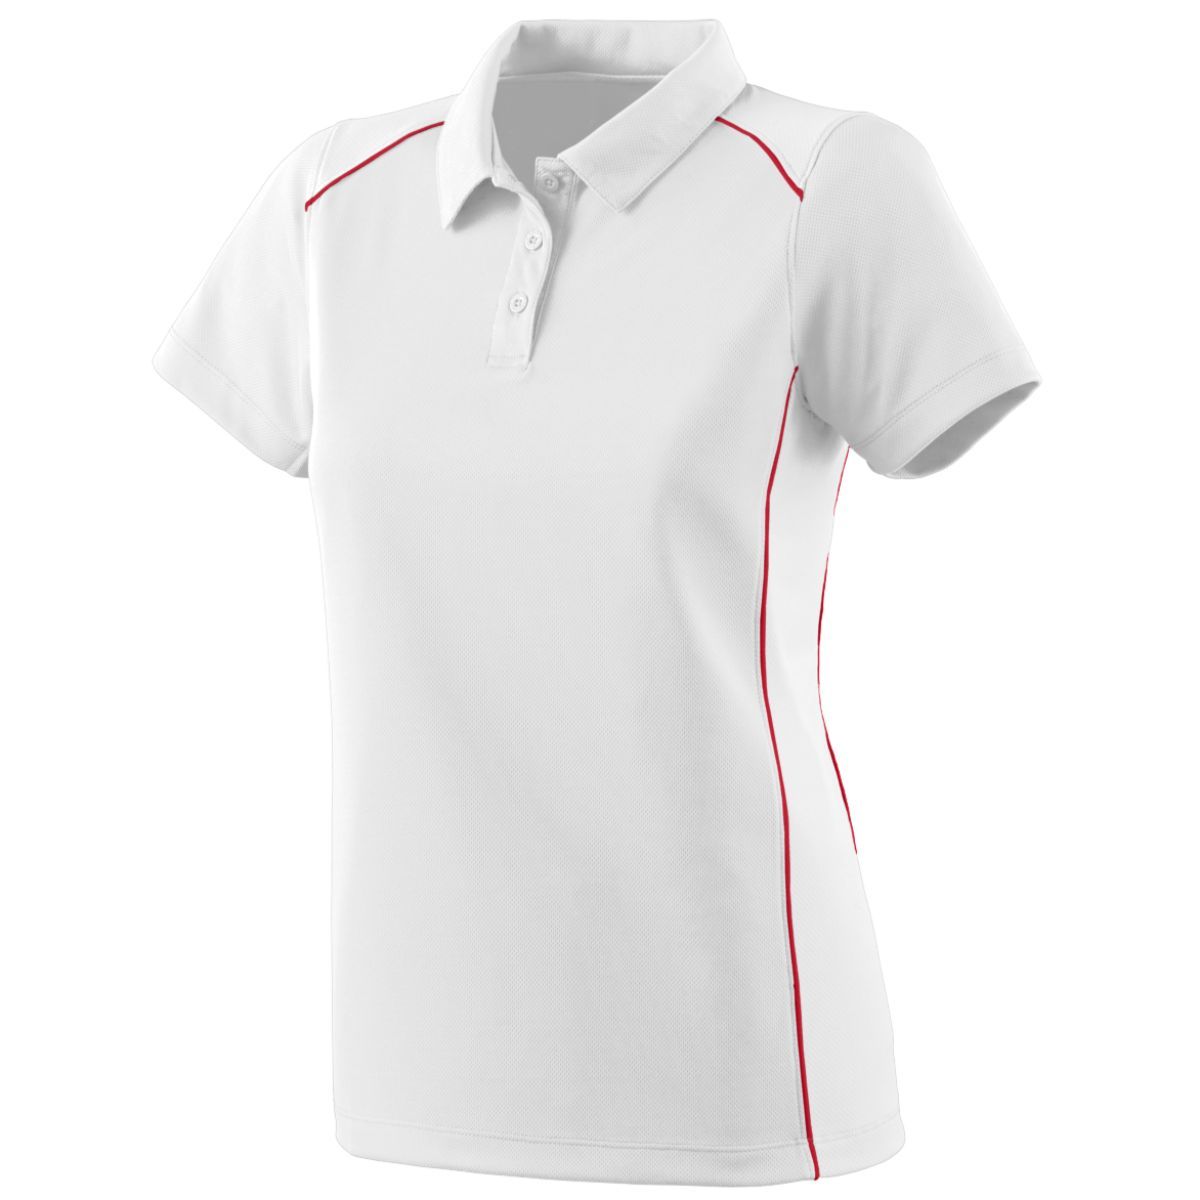 Augusta Sportswear Ladies Winning Streak Polo in White/Red  -Part of the Ladies, Ladies-Polo, Polos, Augusta-Products, Shirts product lines at KanaleyCreations.com